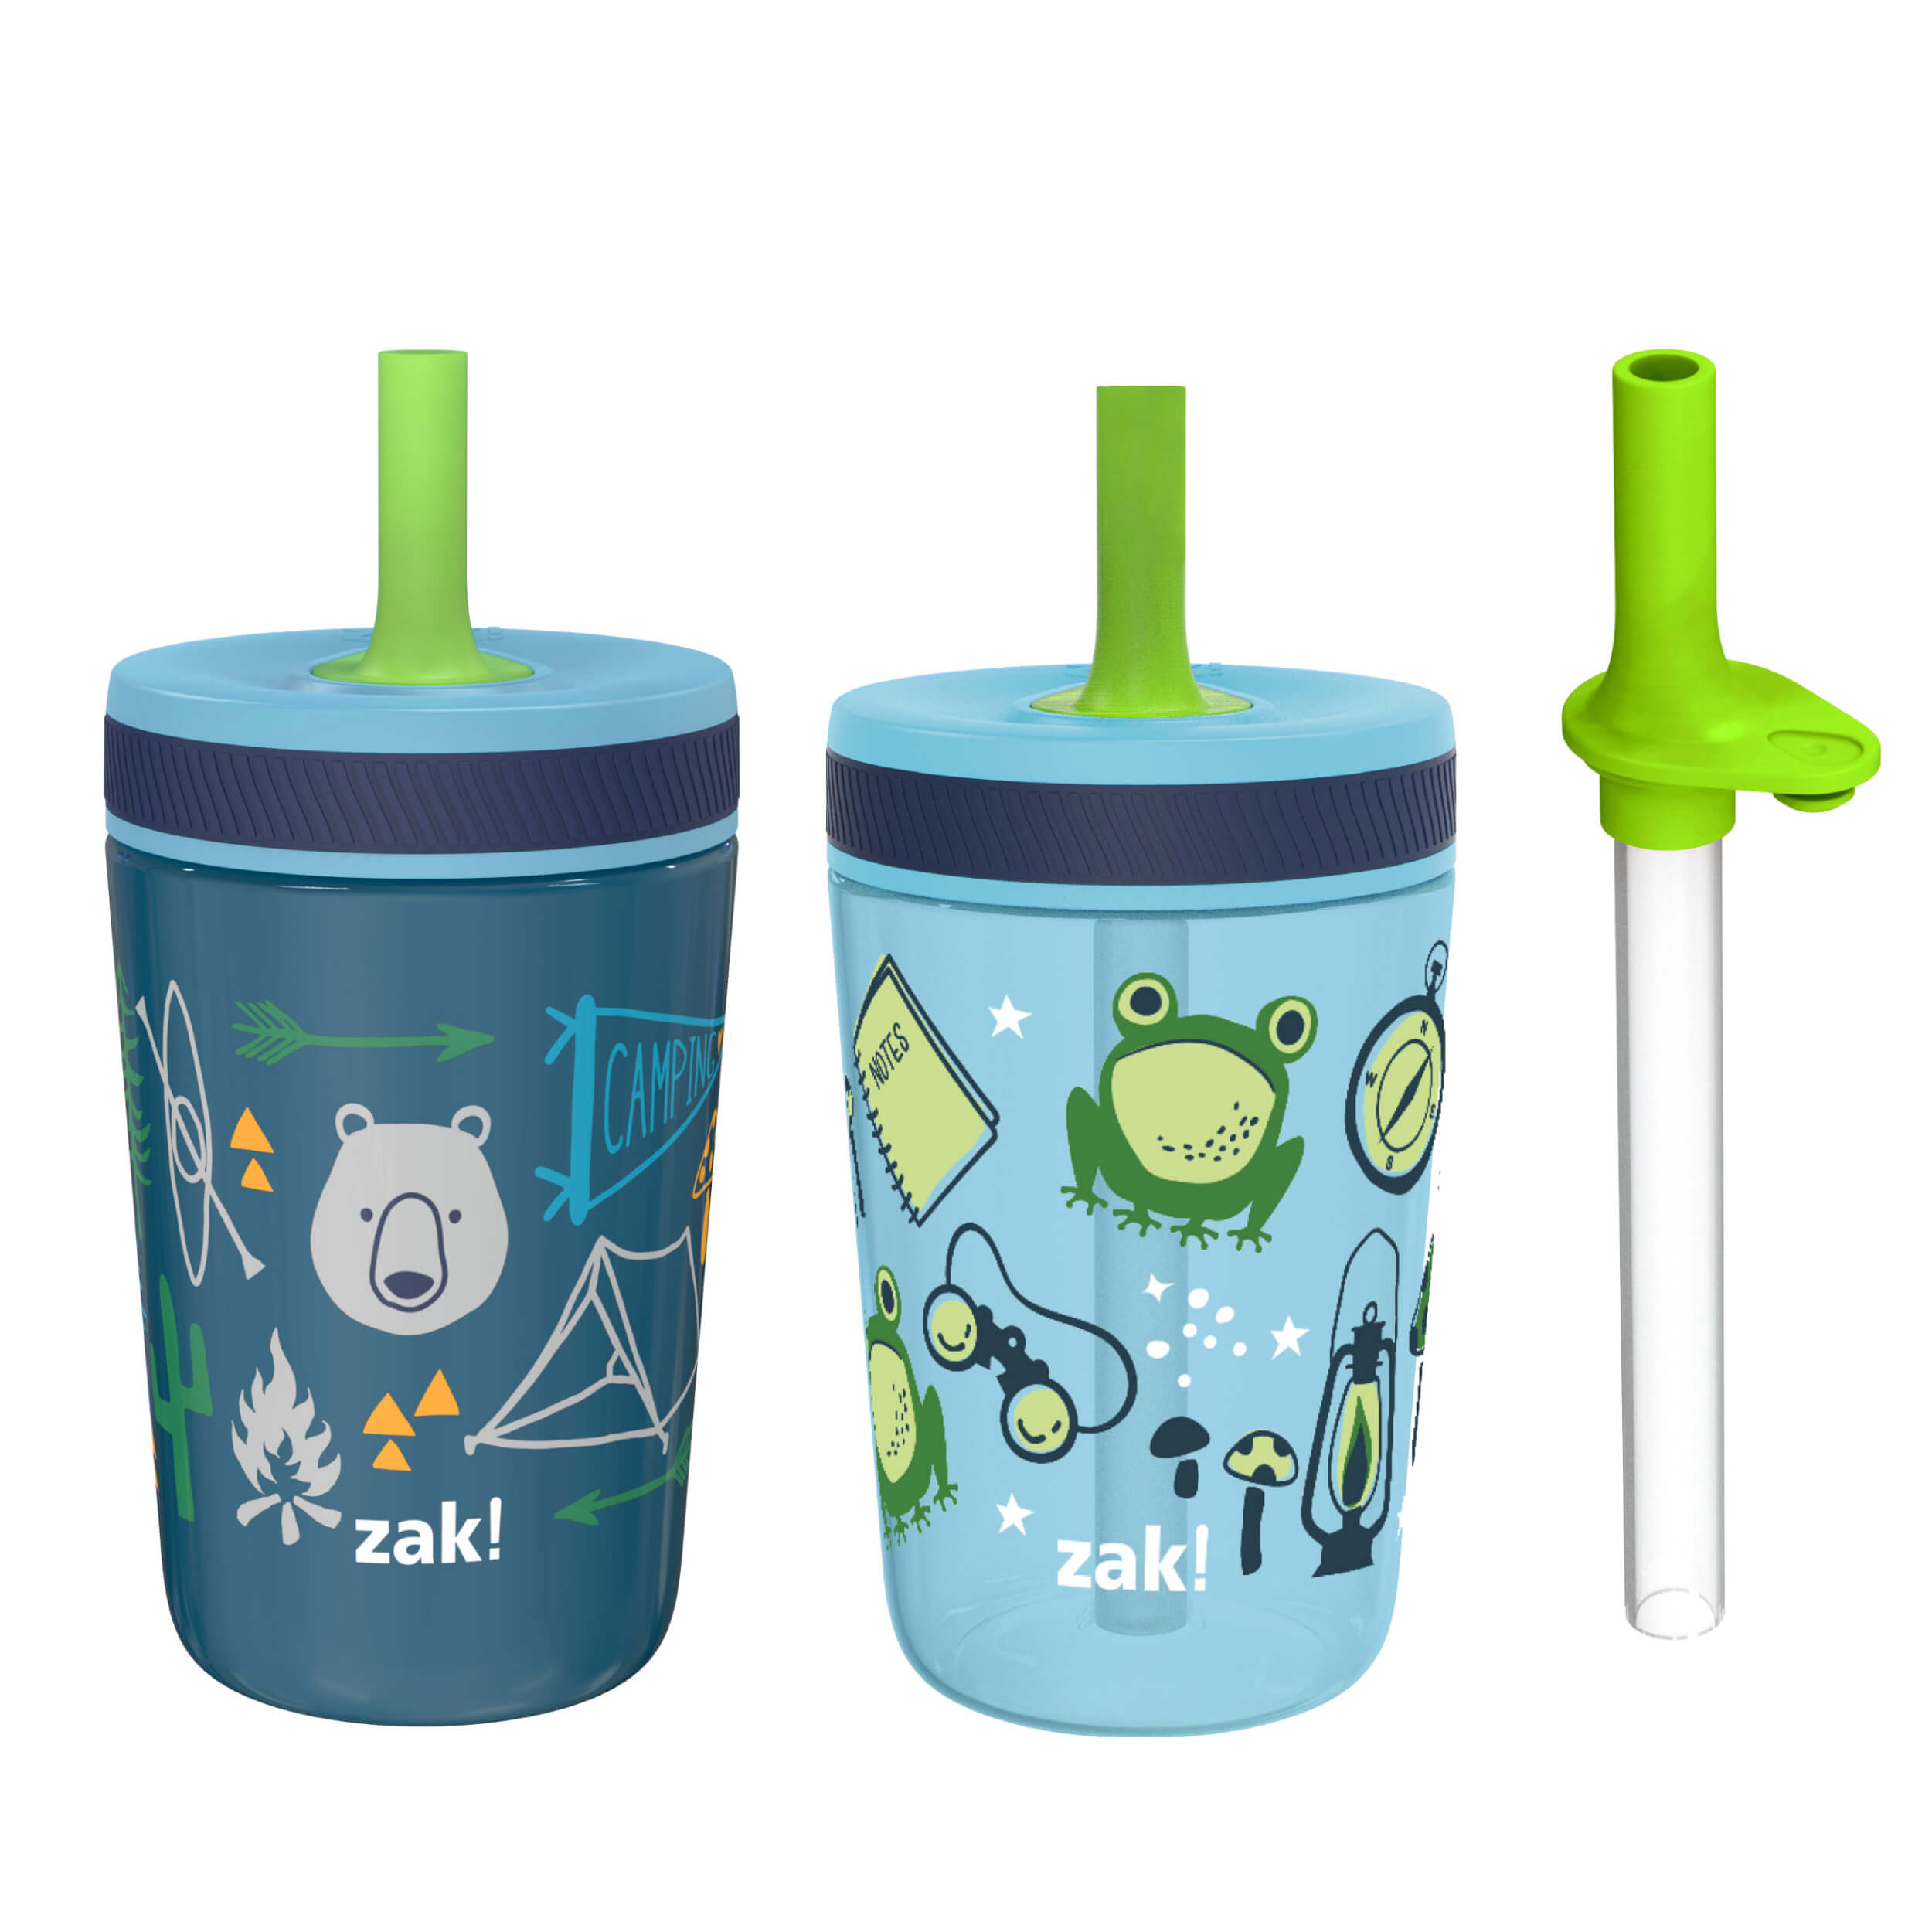 Tiblue Kids & Toddler Cups - Spill Proof Stainless Steel Smoothie Tumblers  with Leak Proof Lids Silicone Straw with Stopper & Sleeve - BPA FREE Snack  Cups for Baby Girls Boys(4 Pack